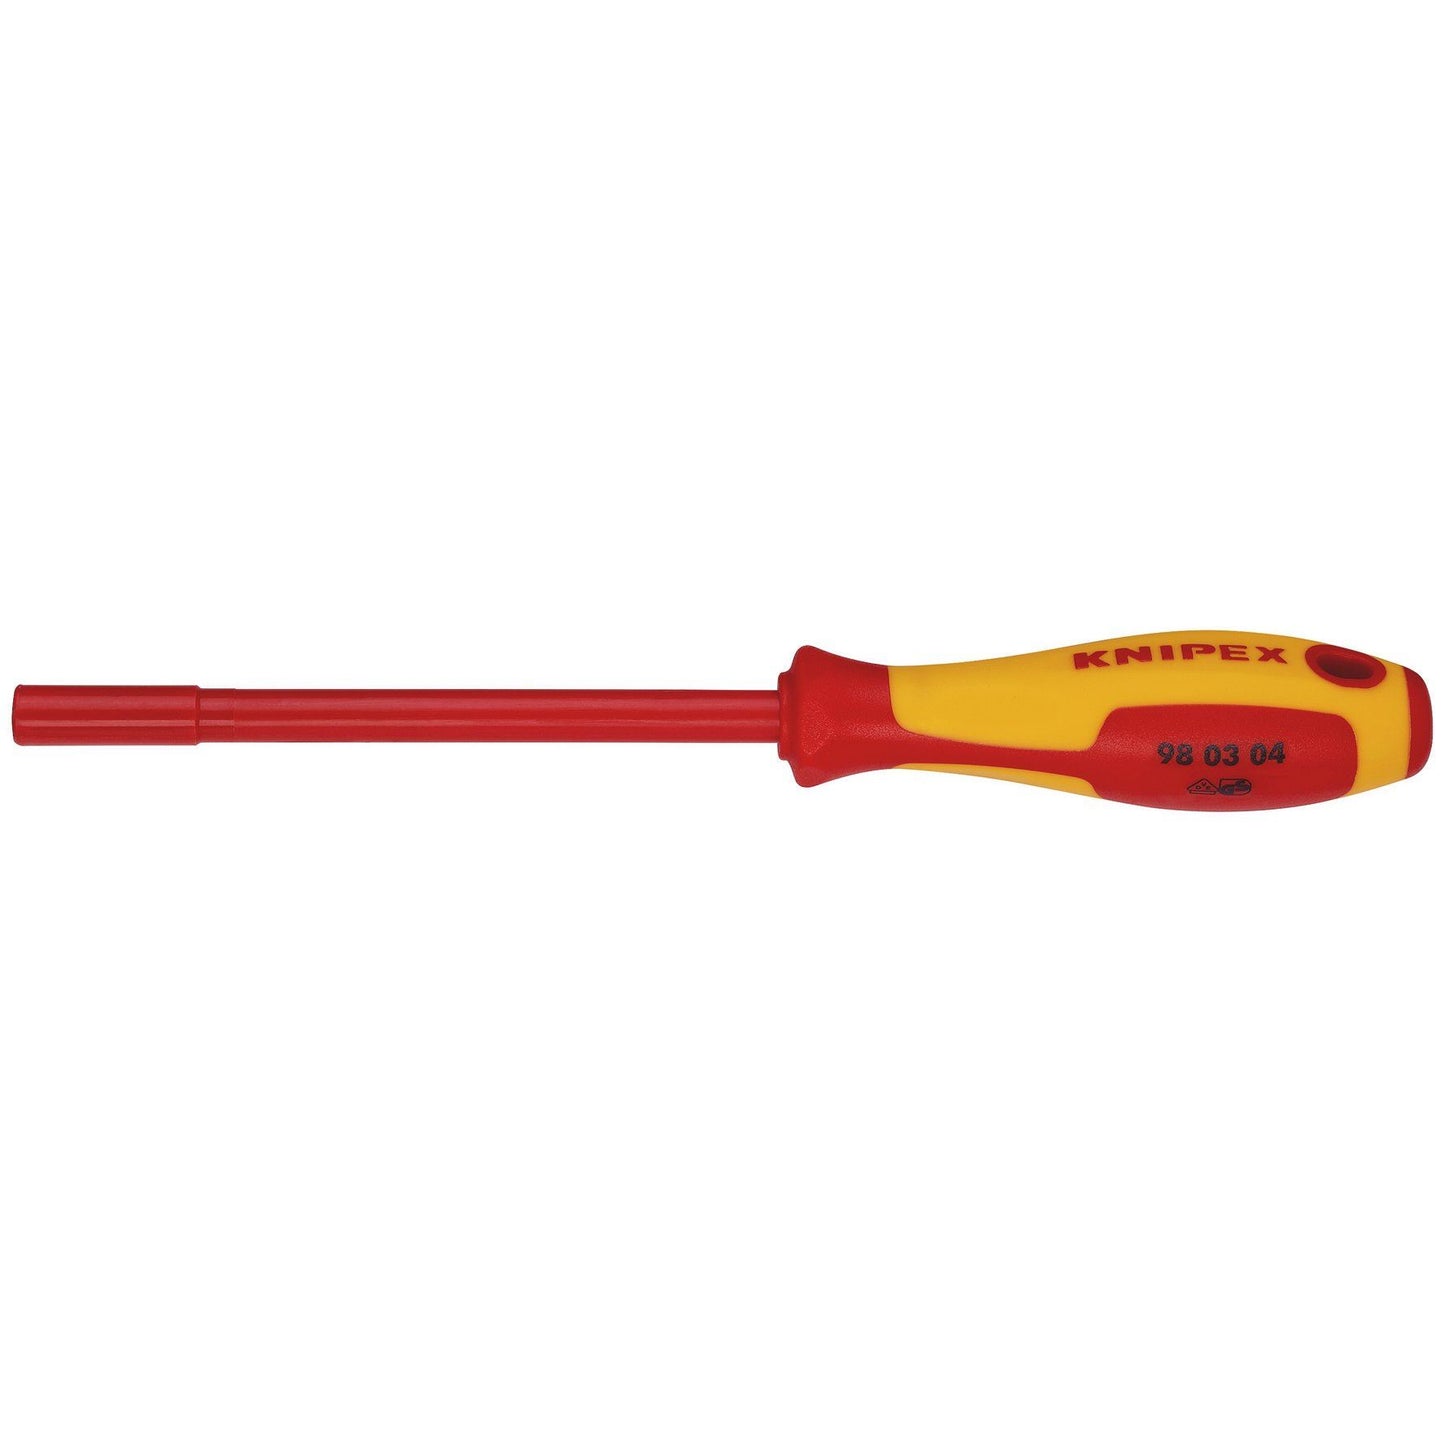 KNIPEX 98 03 04 VDE Insulated Nut Driver, 4.0 x 125mm